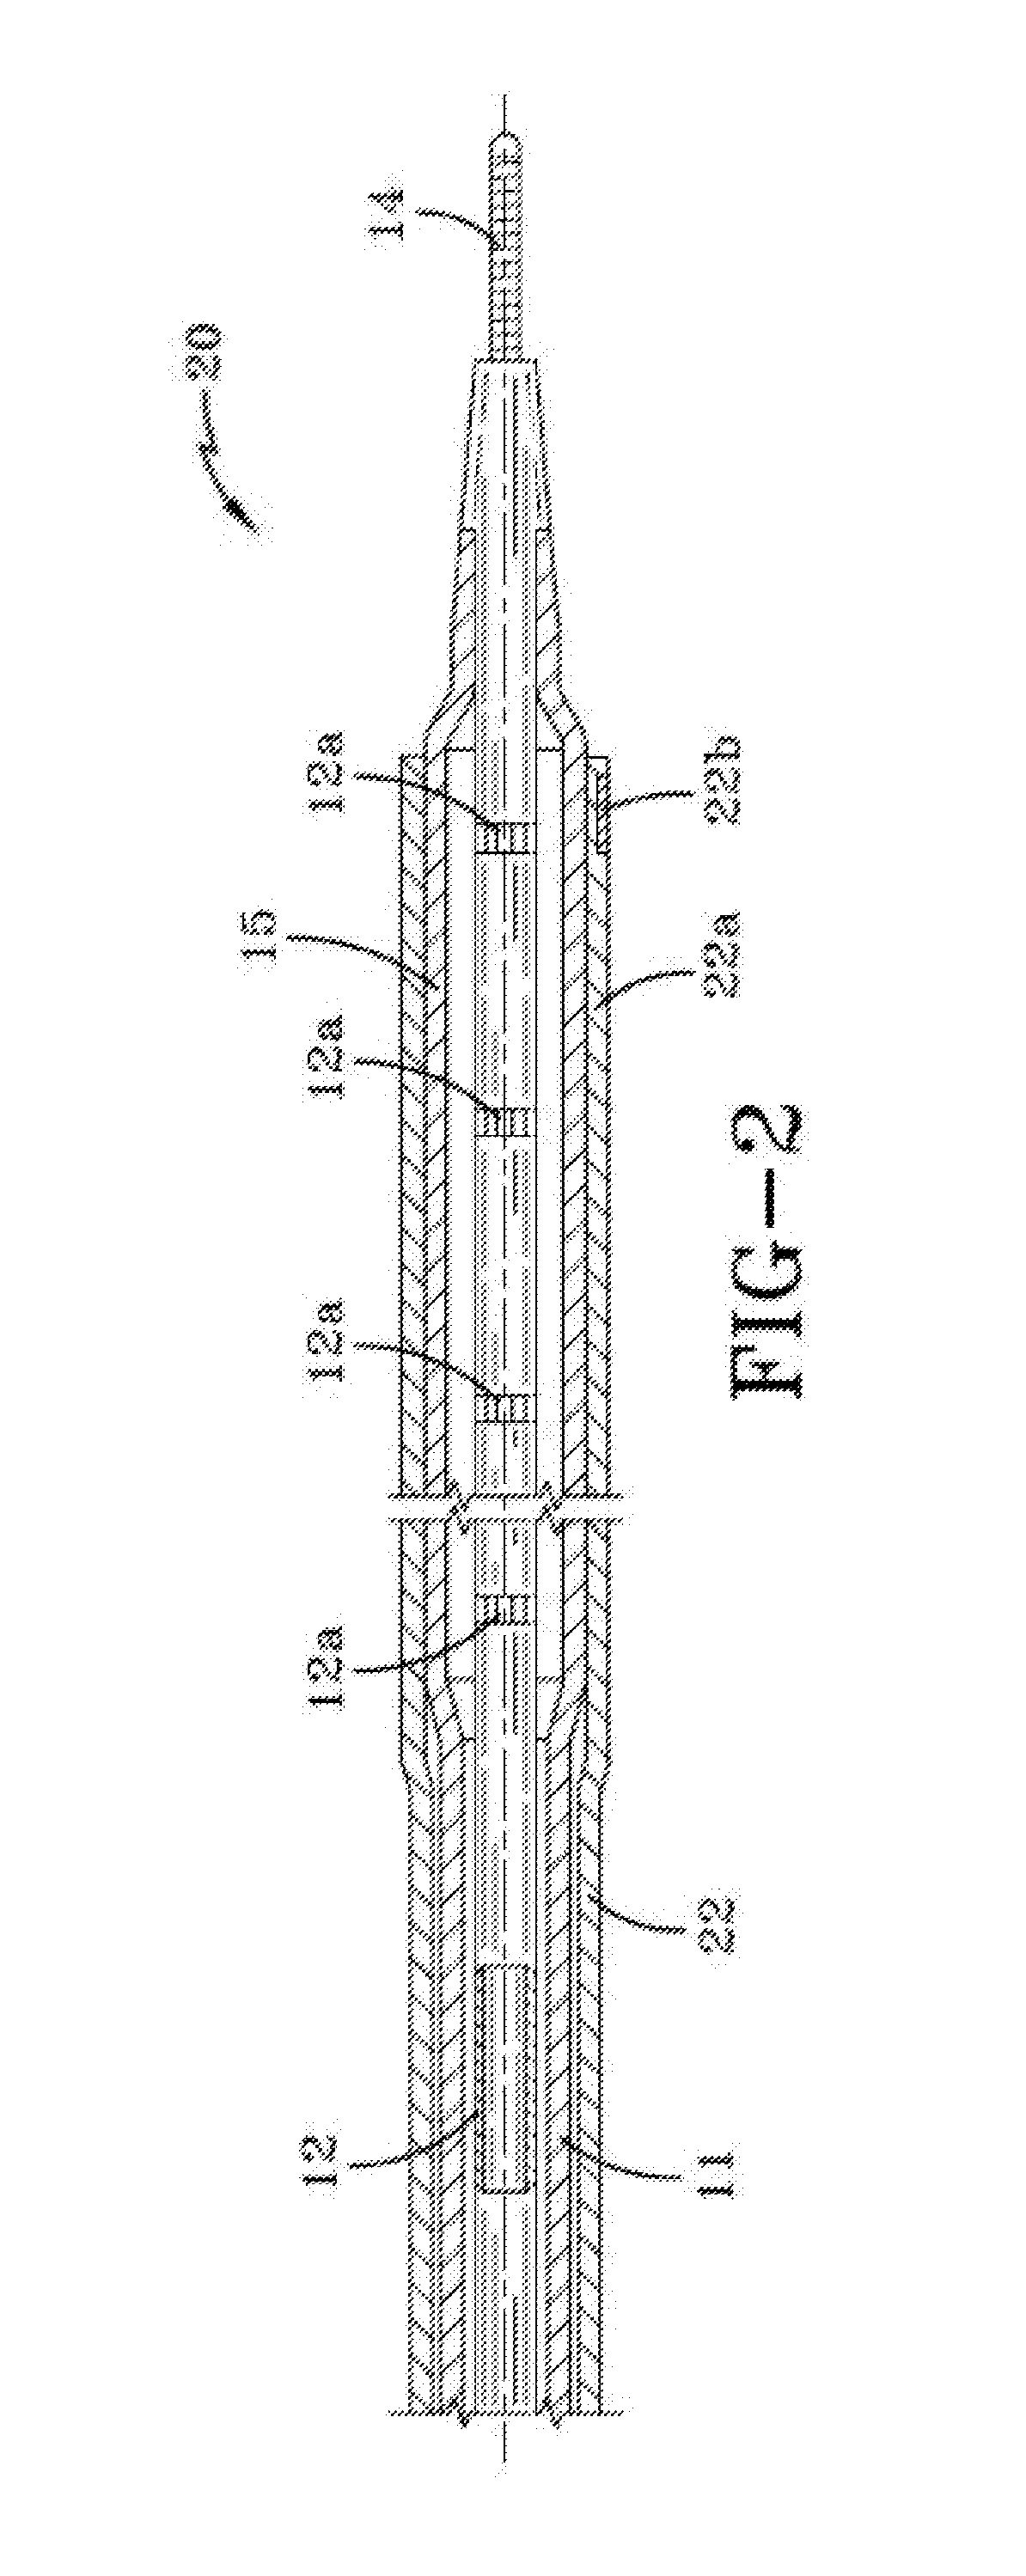 Balloon catheter having a retractable sheath and locking mechanism with balloon recapture element